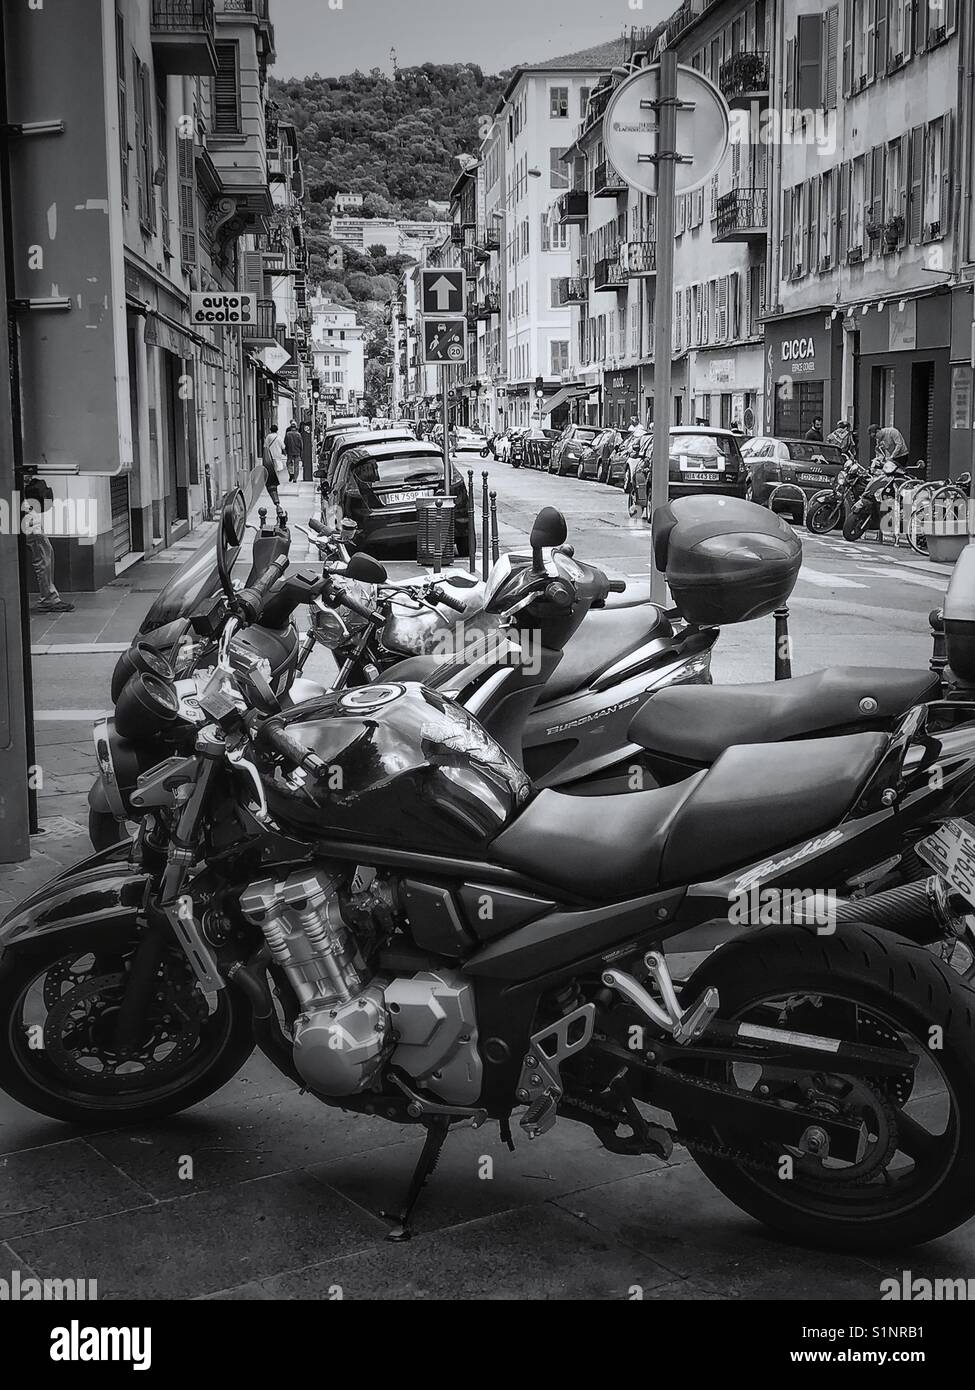 Motorcycles parked on a street in Nice, France. Stock Photo